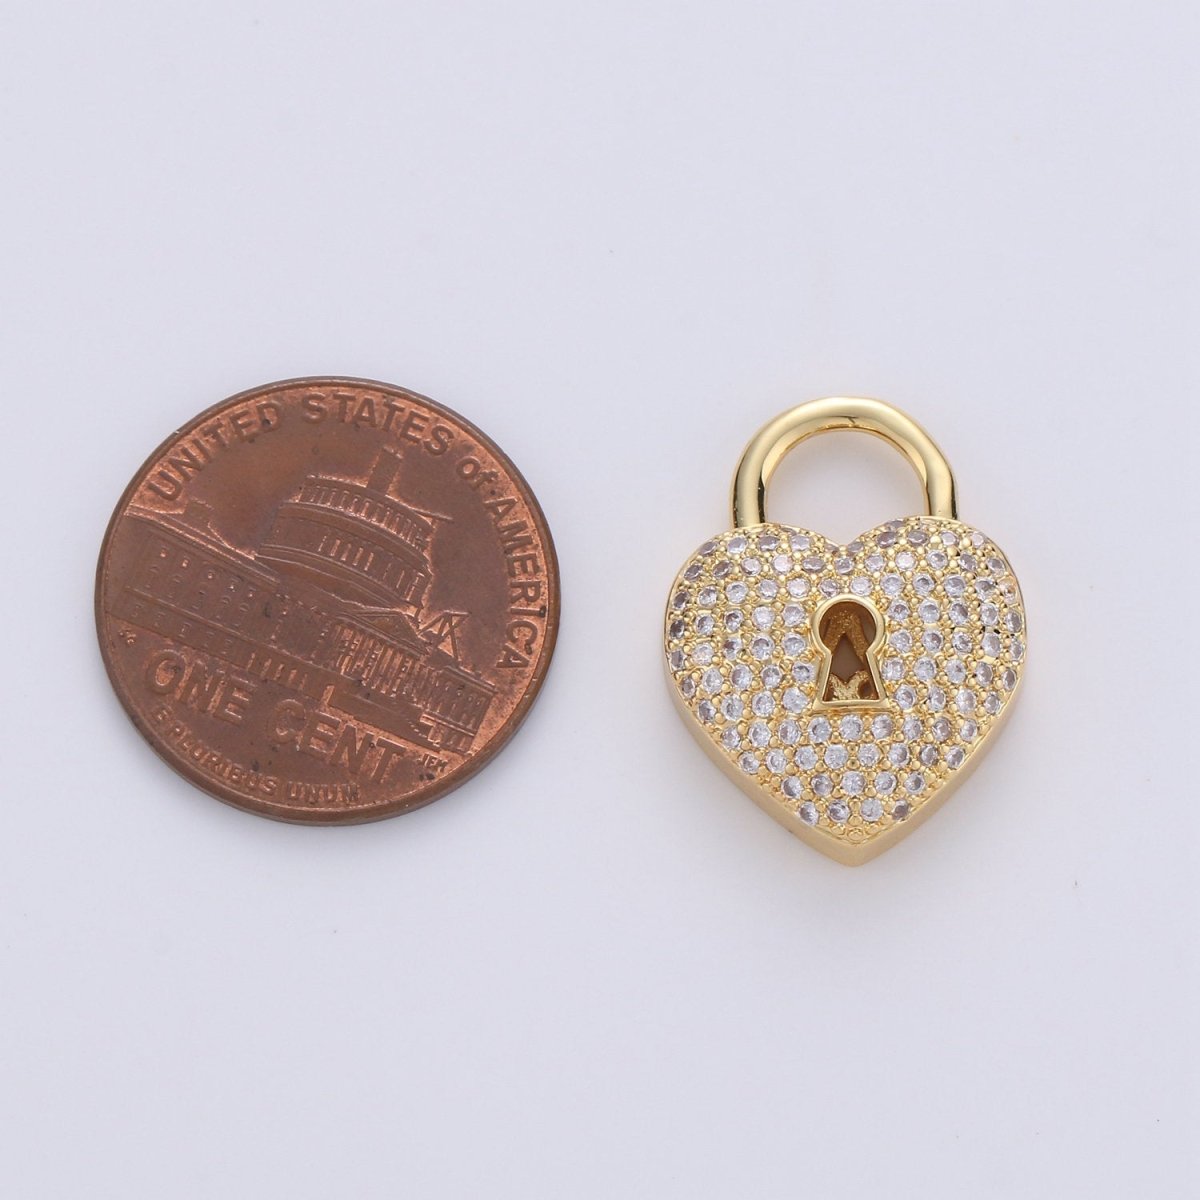 24k Gold Filled Padlock Charm Gold CZ Micro Pave Charm Pendant Heart Lock Charm Necklace for Statement Necklace Component D-618 - DLUXCA